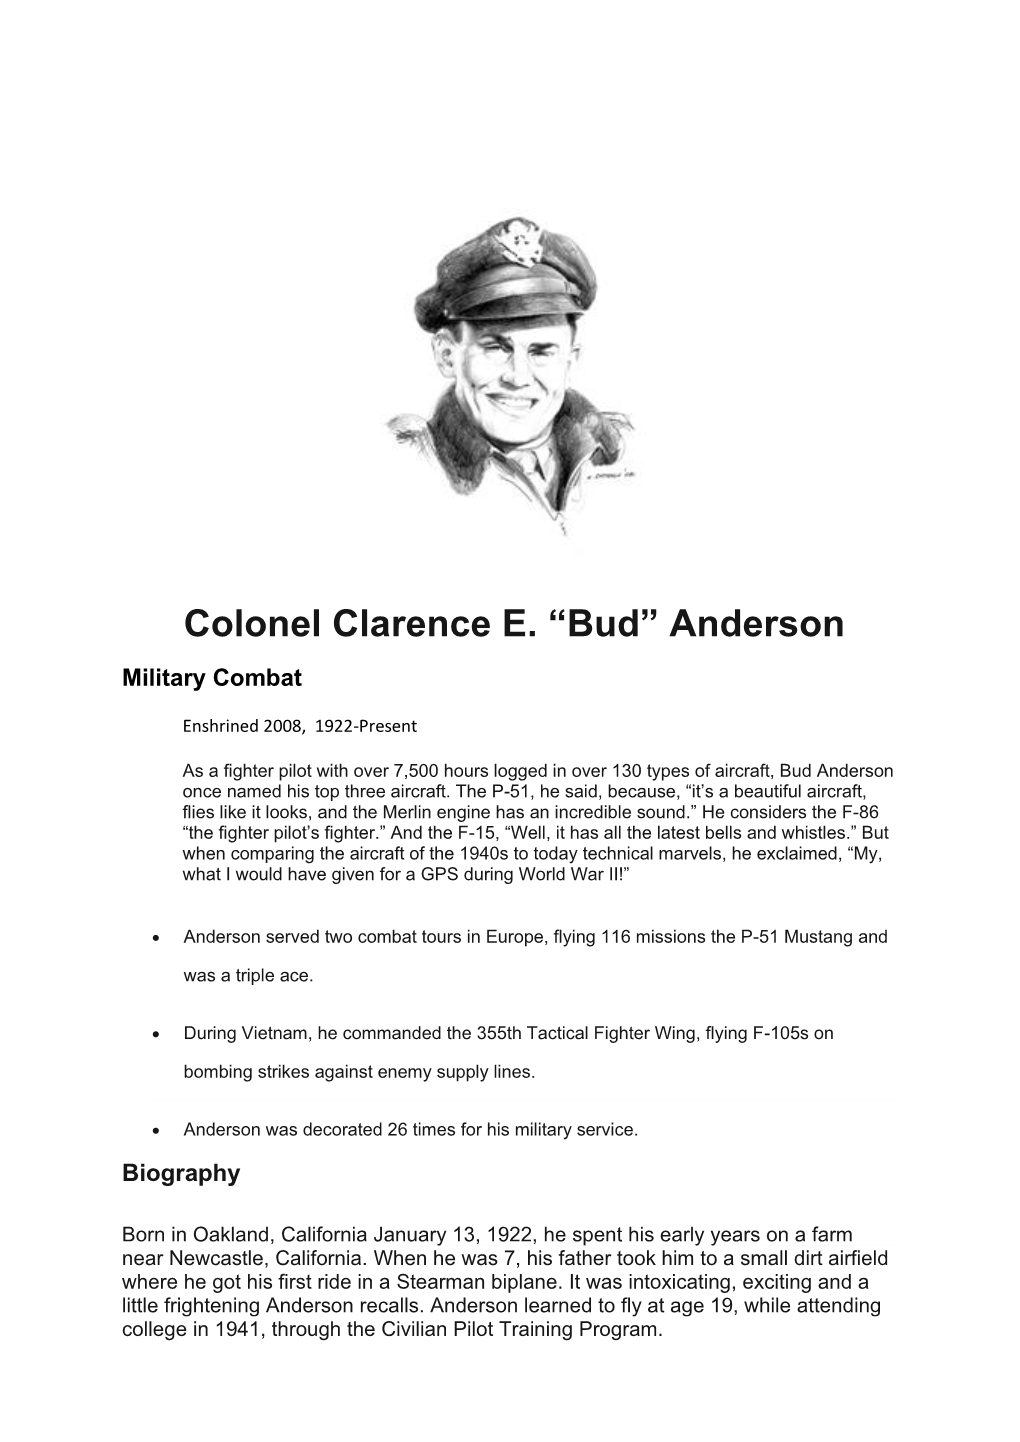 Colonel Clarence E. “Bud” Anderson Military Combat